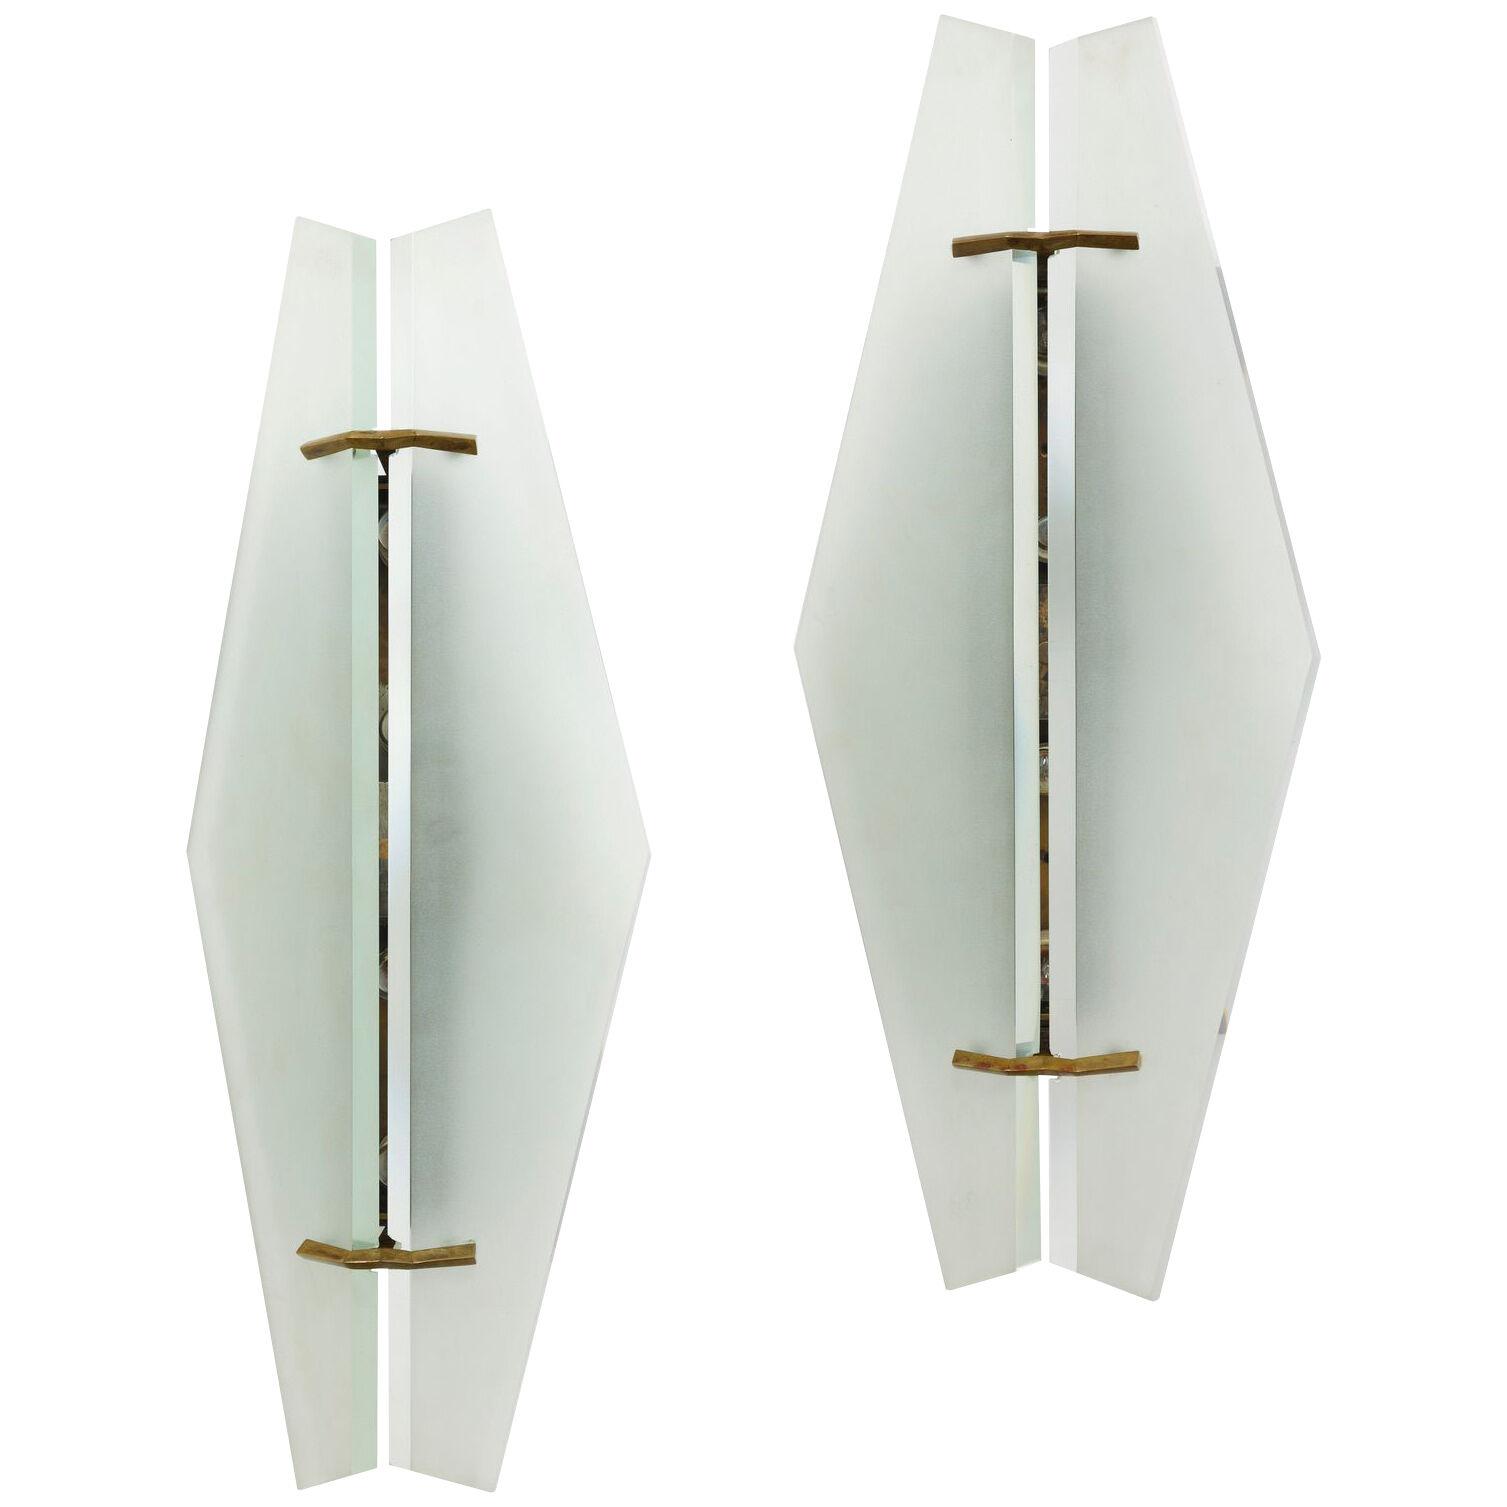 Pair of Sconces Made by Max Ingrand for Fontana Arte, model 1943